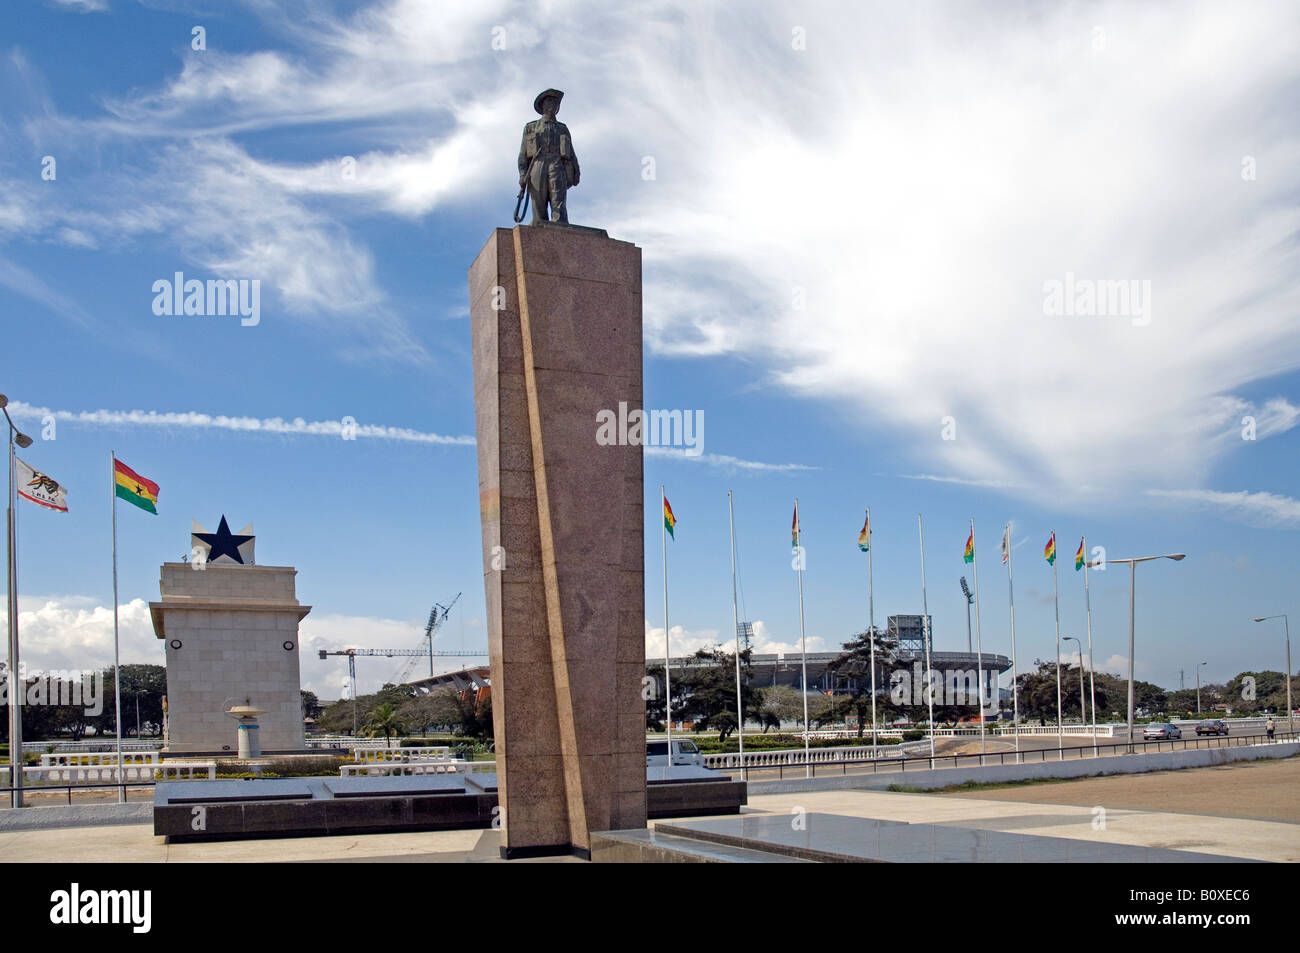 Statue of the unknown soldier, Independence Square, Accra, Ghana Stock Photo